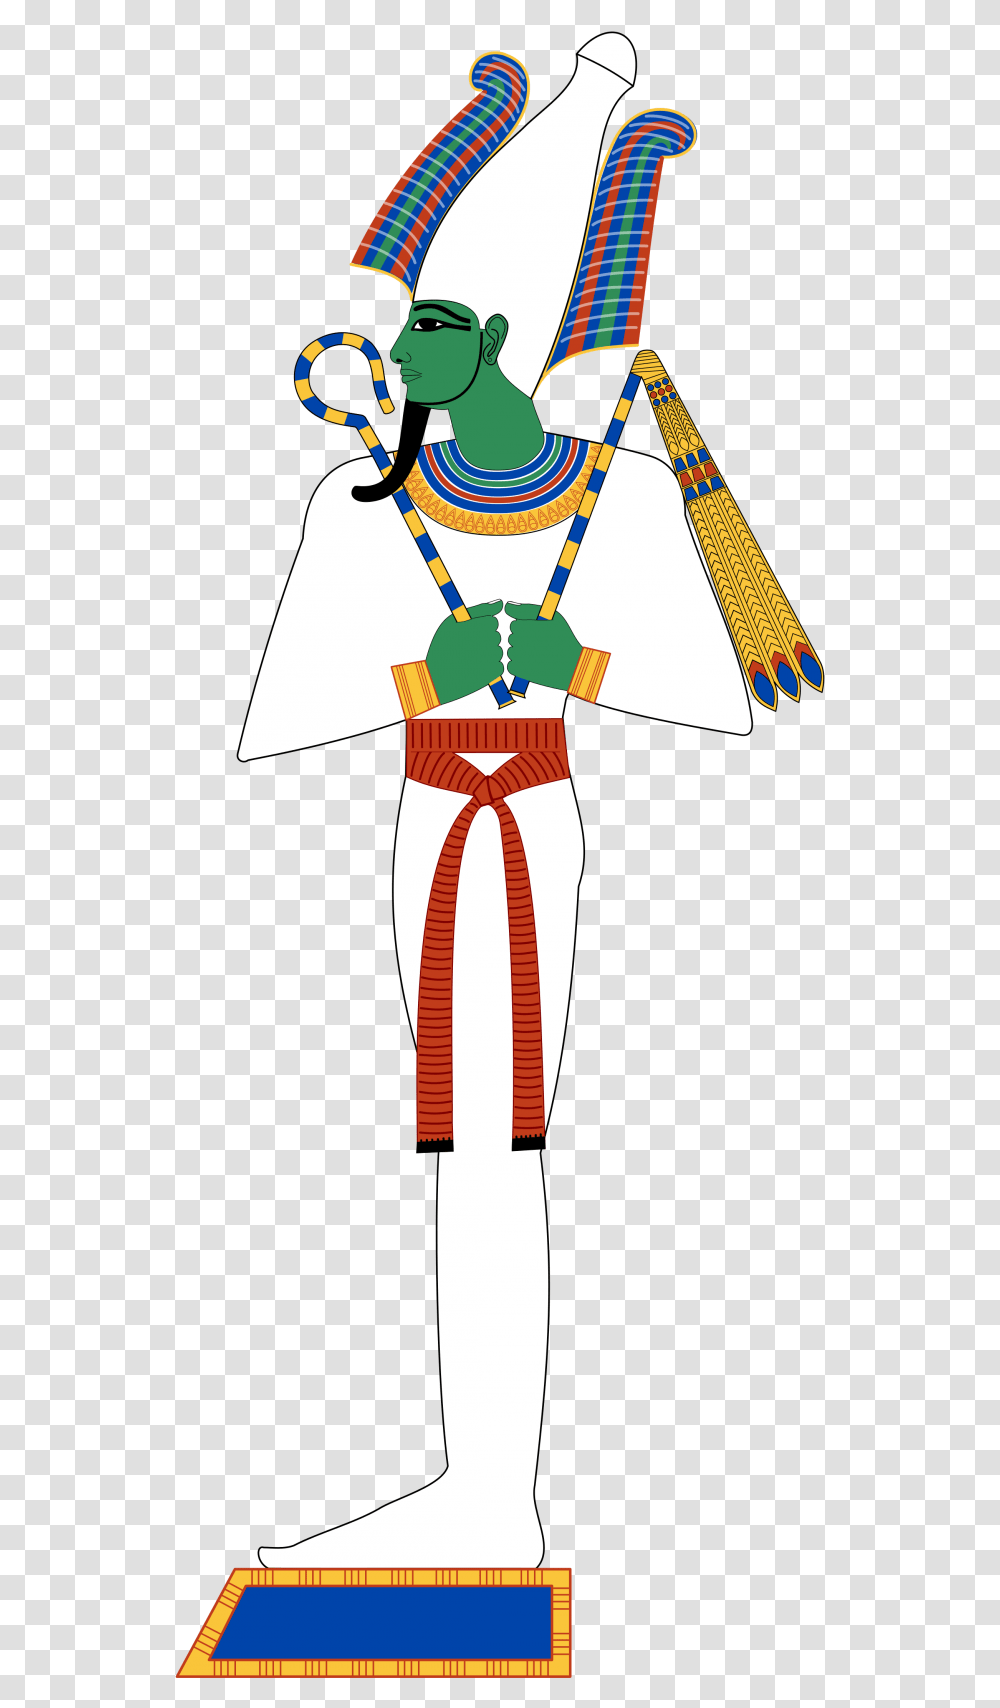 Osiris Was The King Of The Underworld According To Osiris Egyptian God, Costume, Face, Cape Transparent Png